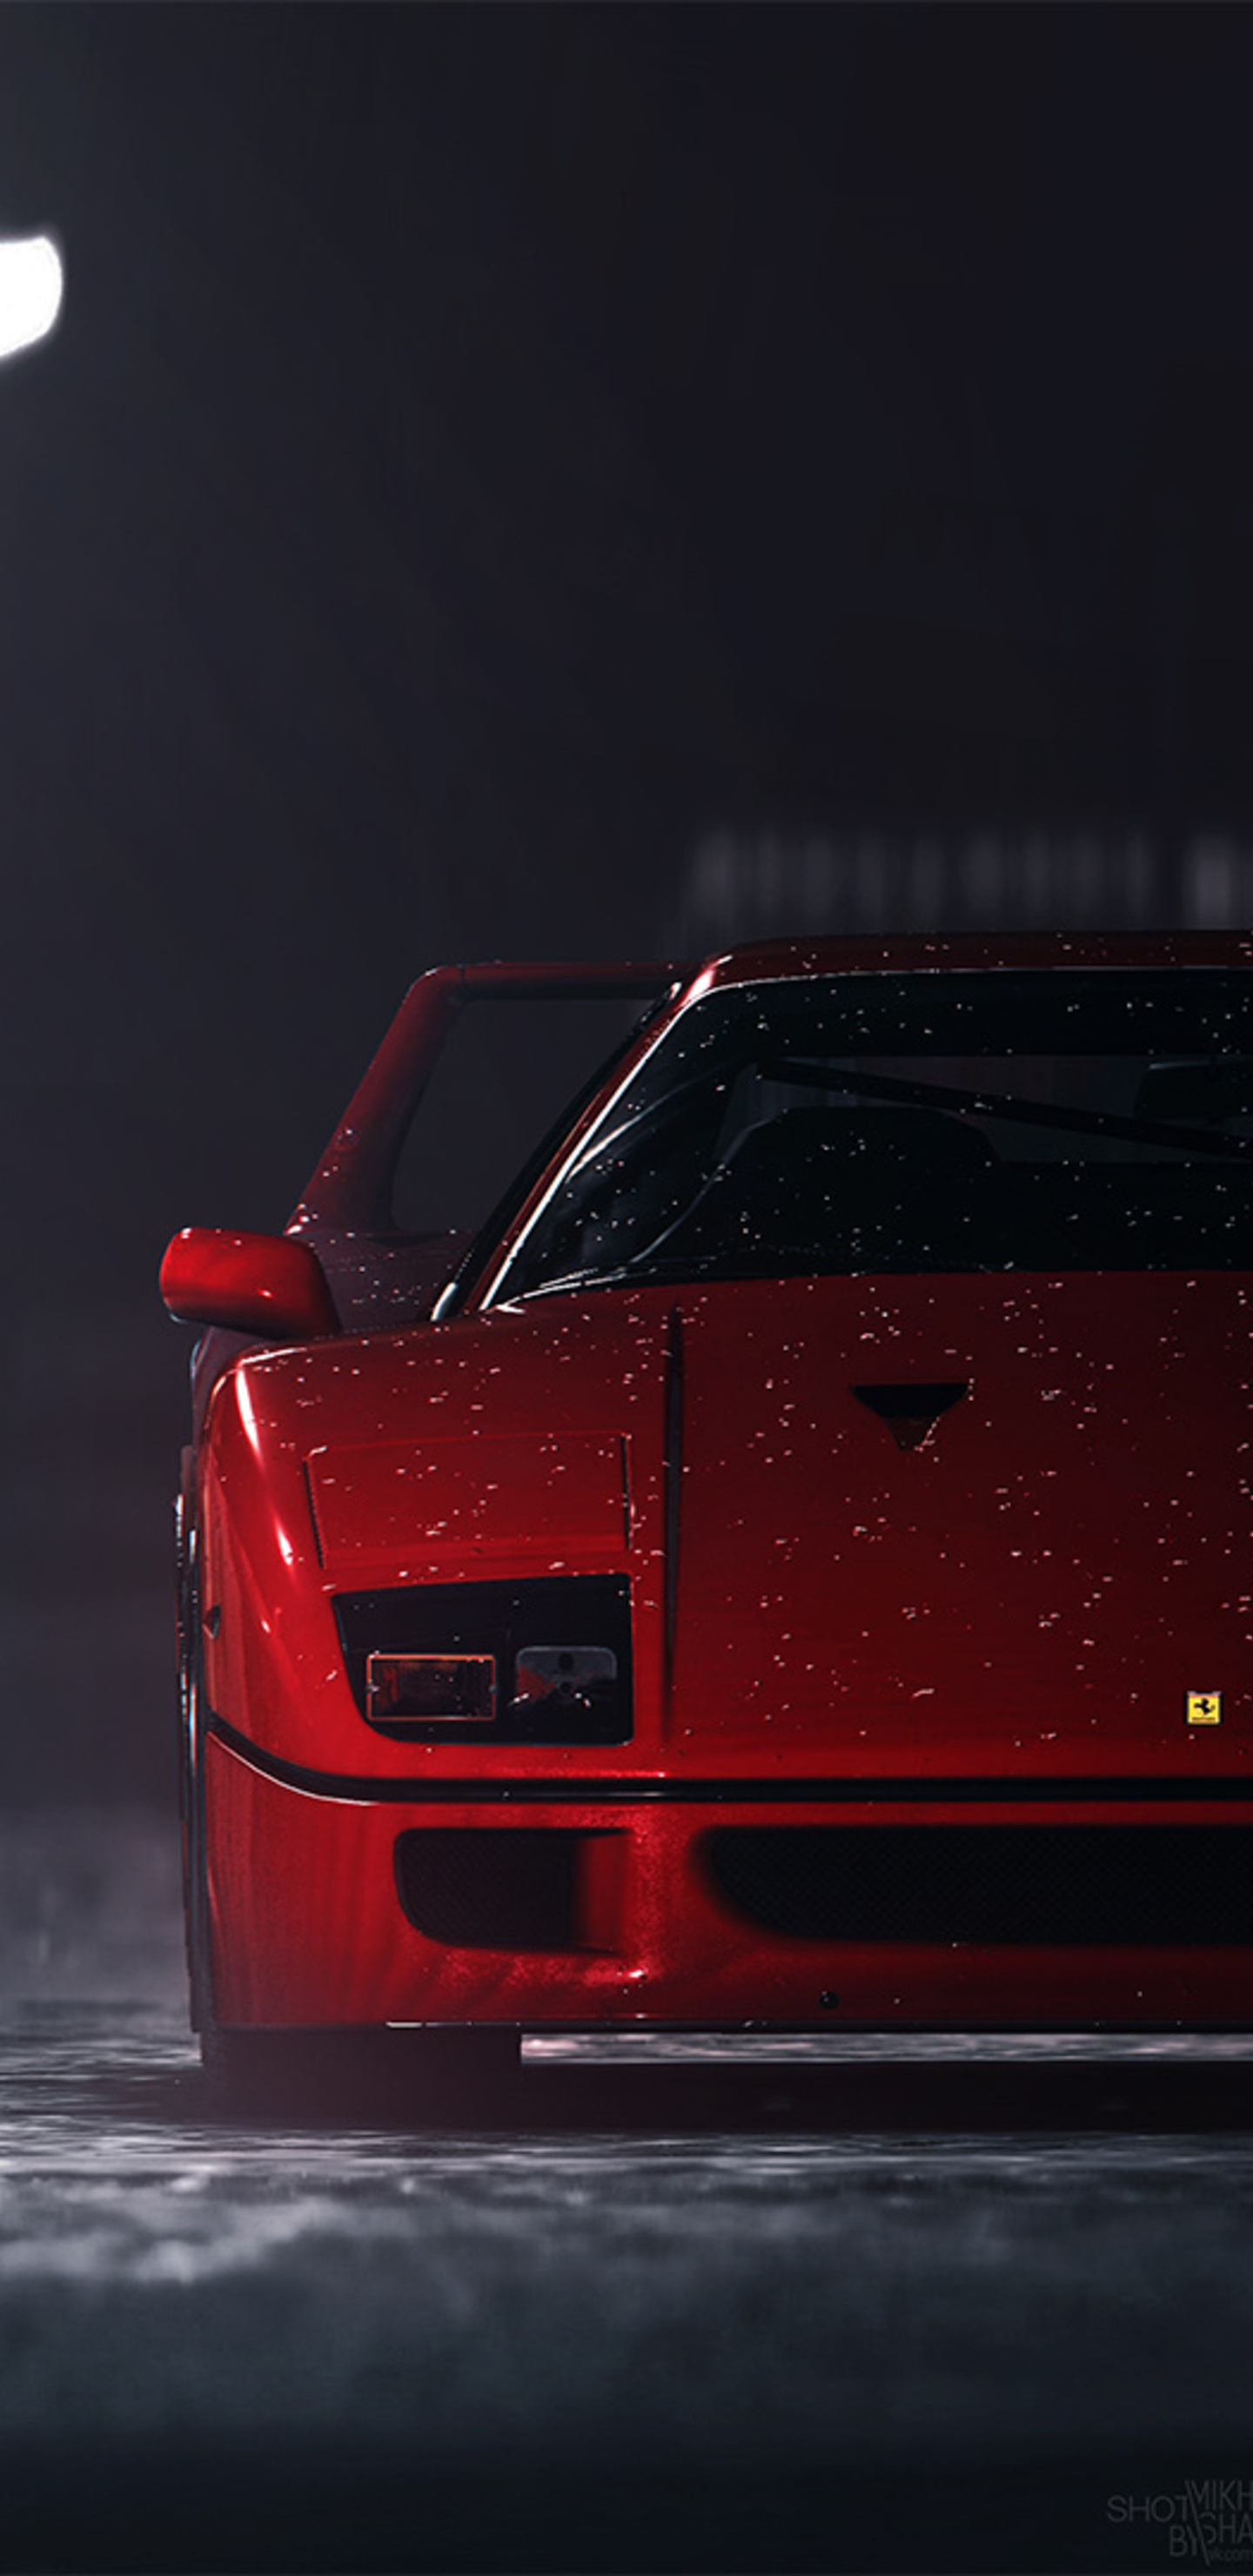 1440x2960 Ferrari F40 In Need For Speed Samsung Galaxy Note 9 8 S9 S8 S8 Qhd Hd 4k Wallpapers Images Backgrounds Photos And Pictures